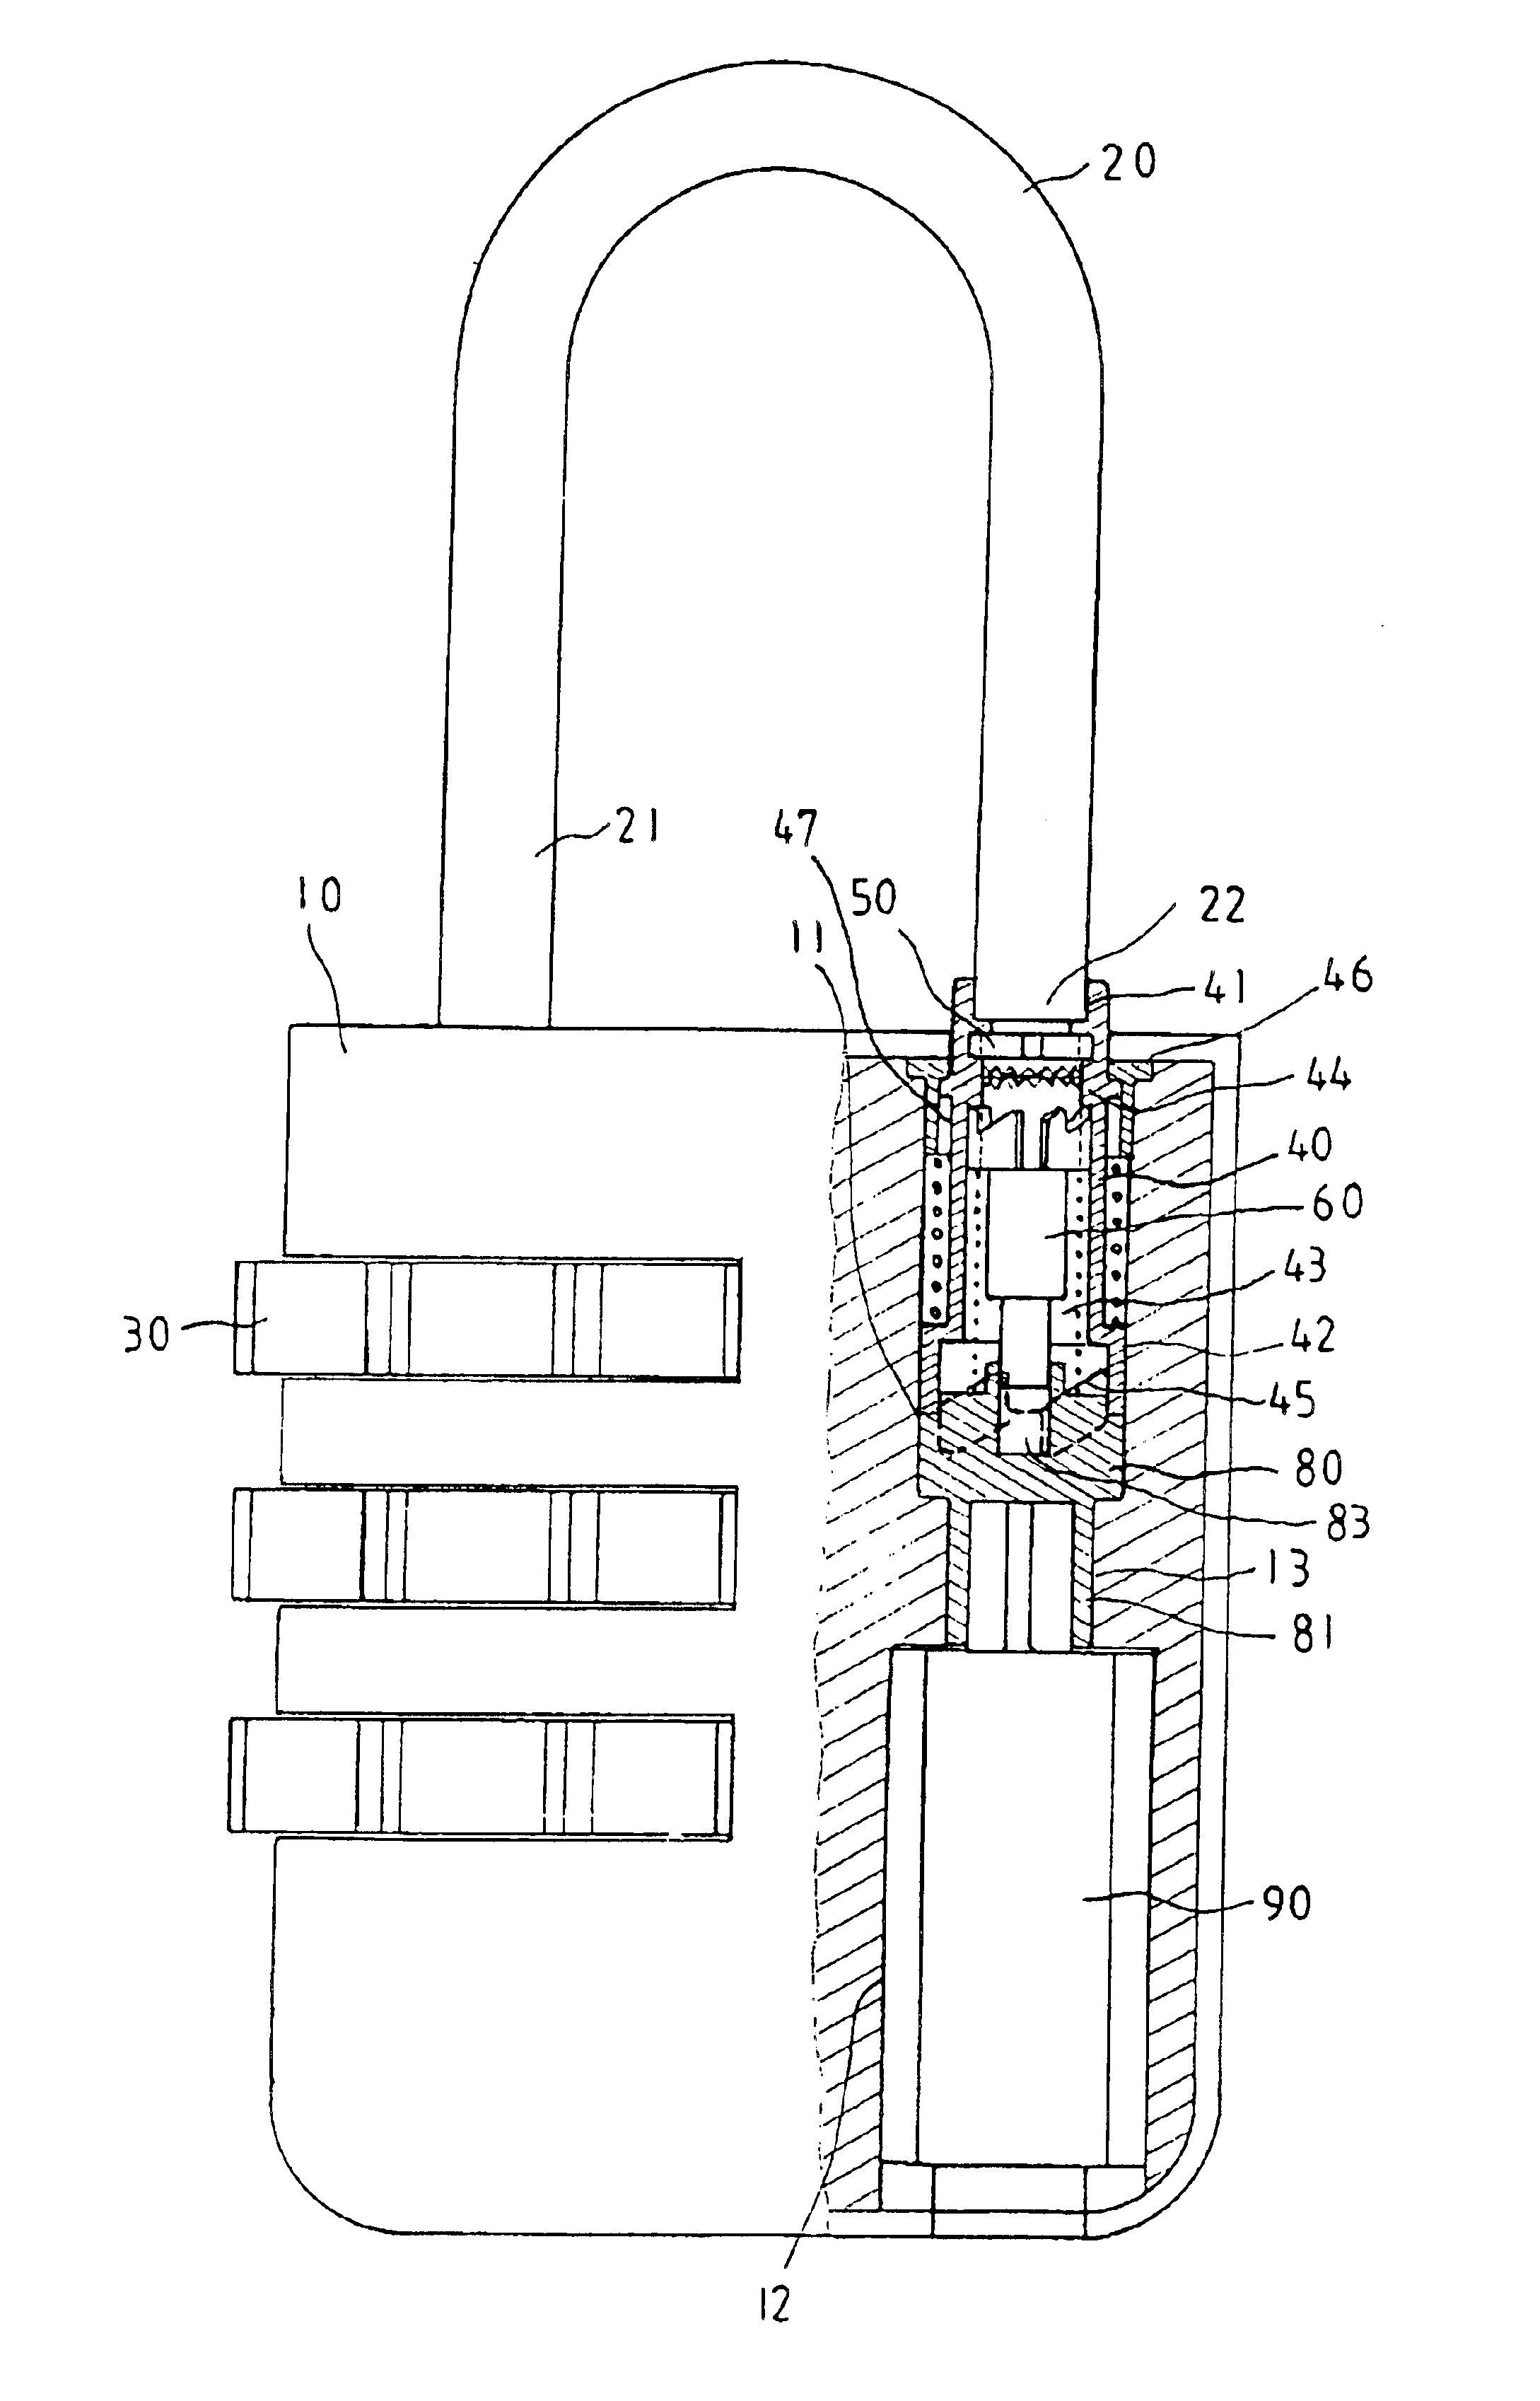 Combination lock capable of being opened by a key or inhibited the same